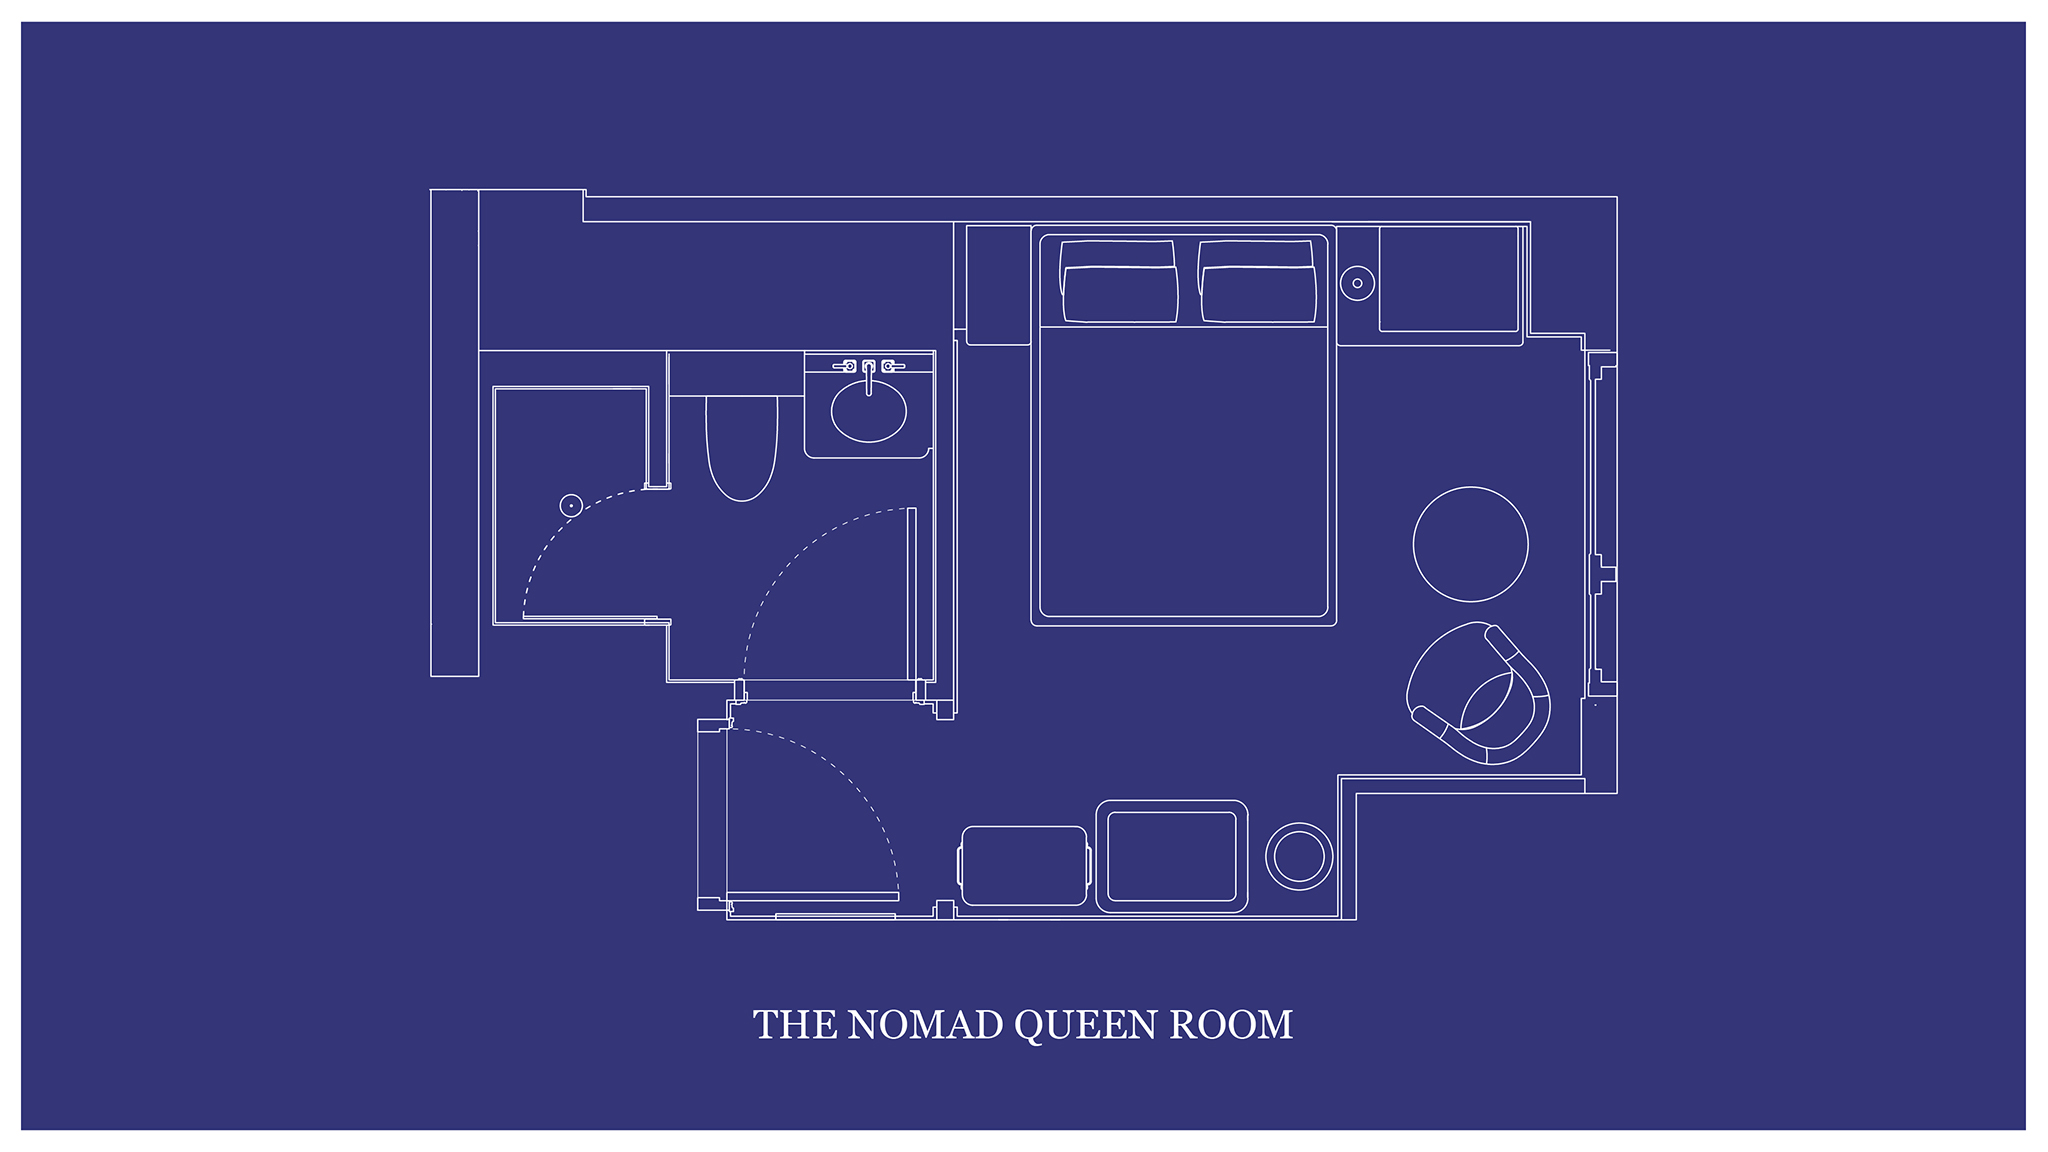 The architectural layout of "THE NOMAD QUEEN ROOM" is depicted on a blueprint map.